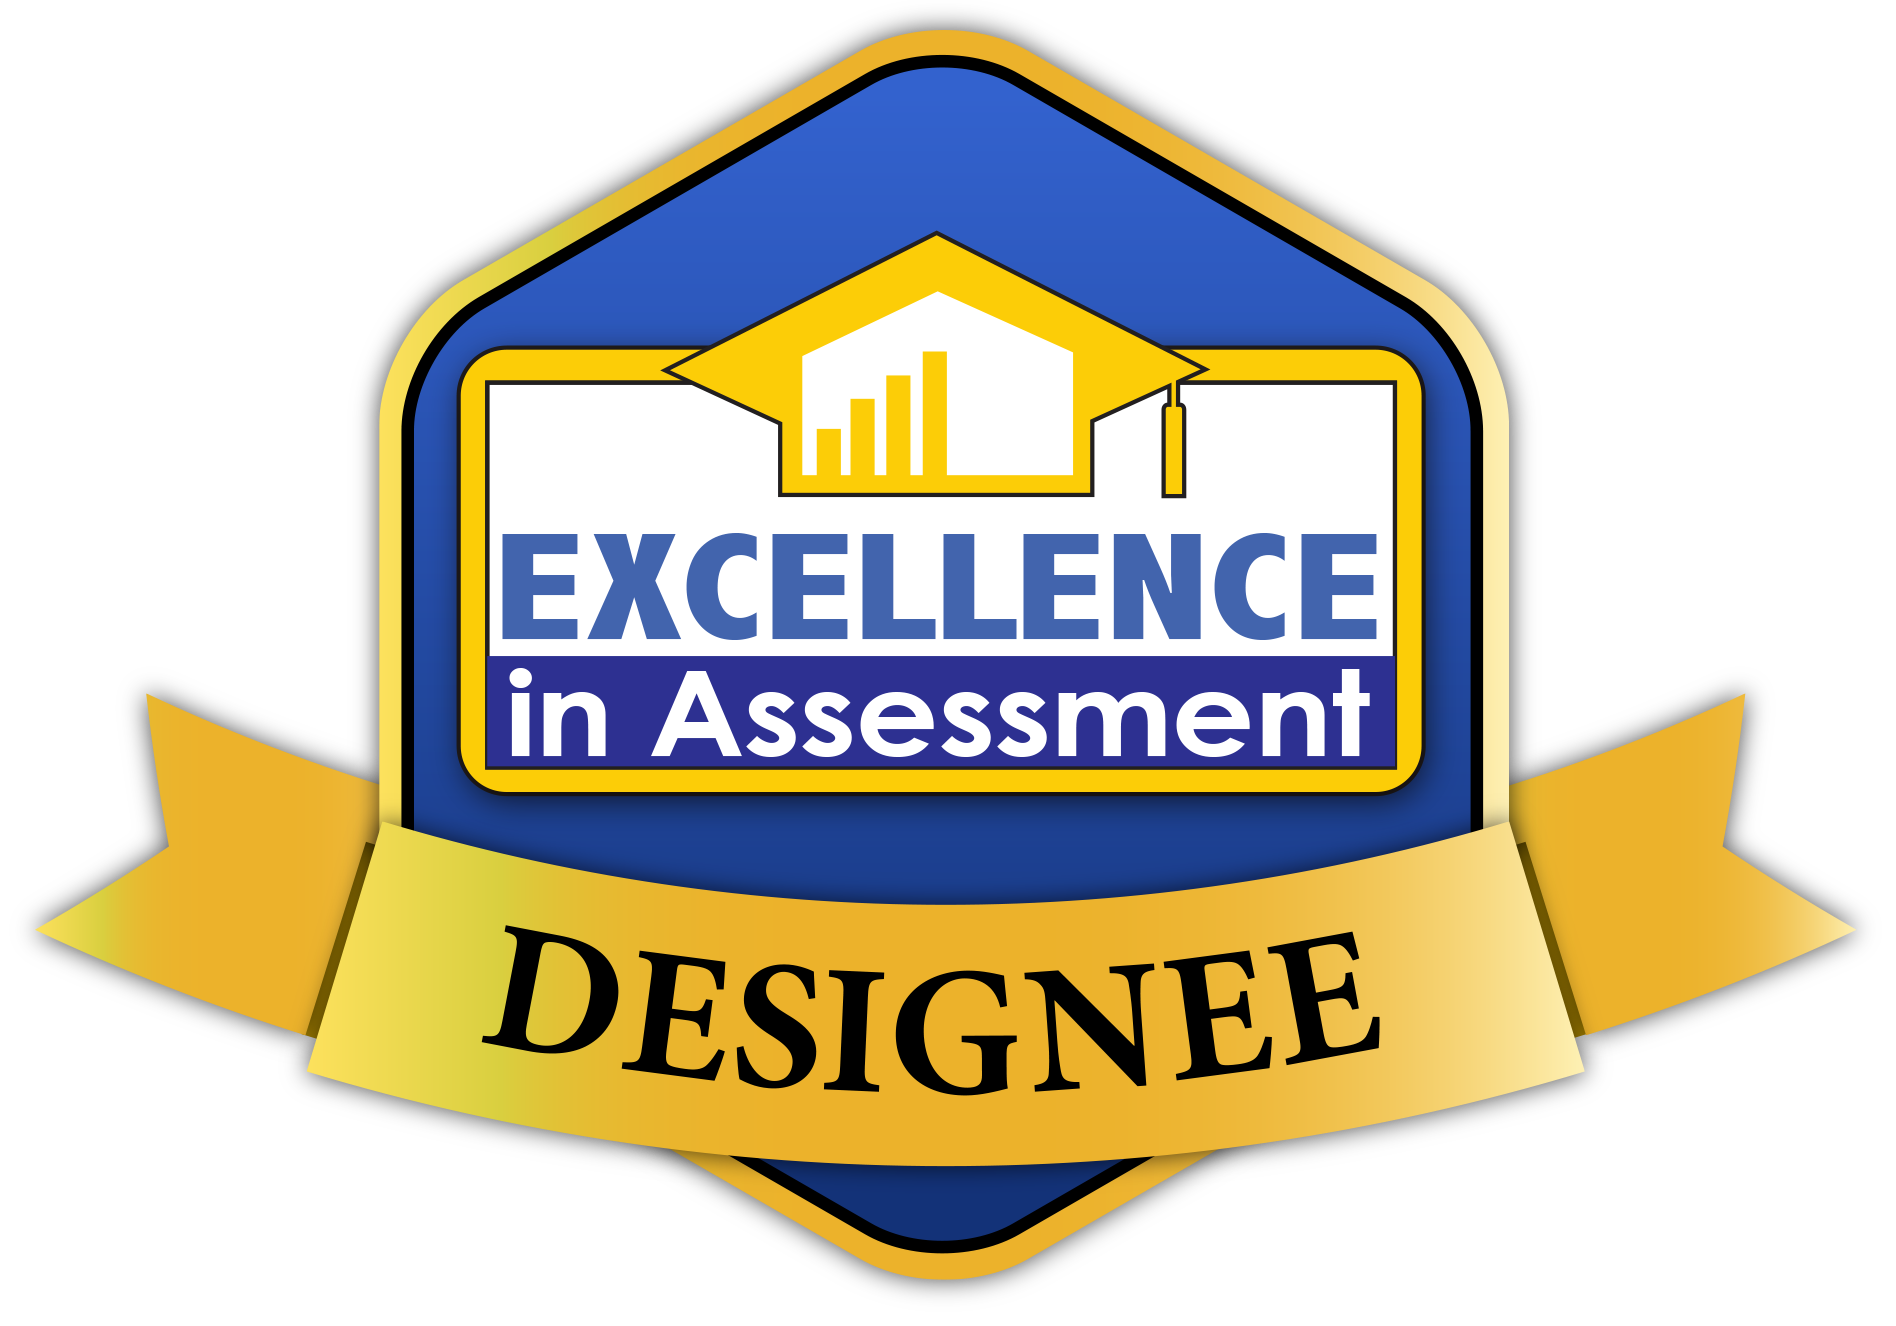 Excellence in Assessment Designee badge